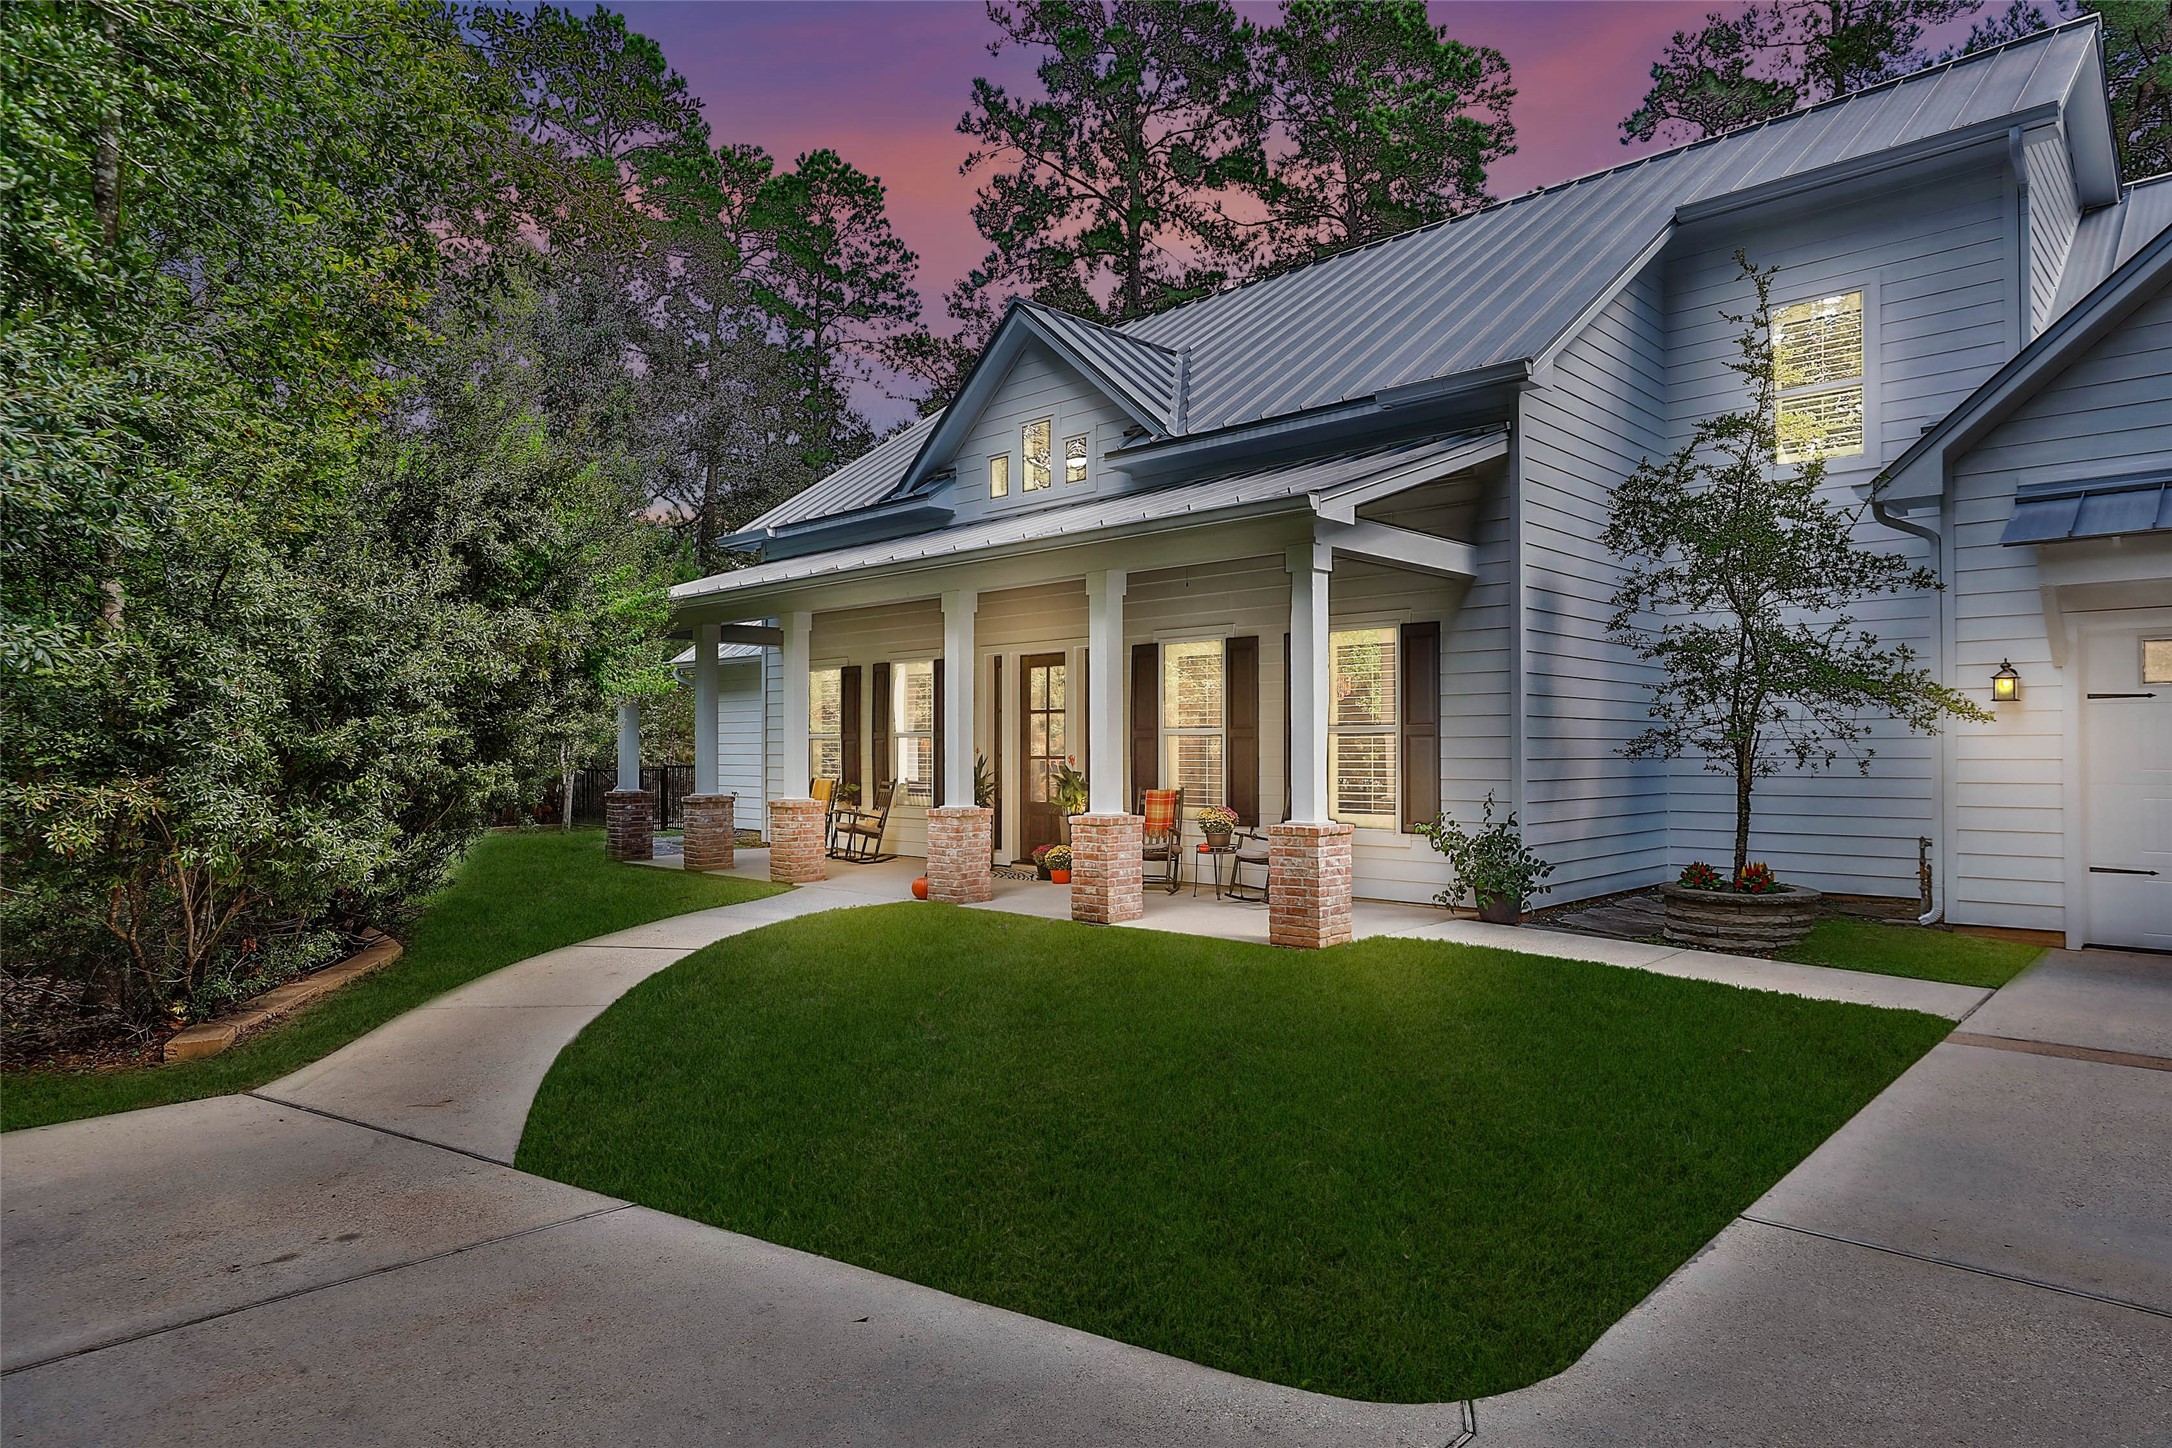 Twilight view of this Modern Farmhouse nestled on 2.023 Lakefront, Wooded acres in Magnolia, Texas...